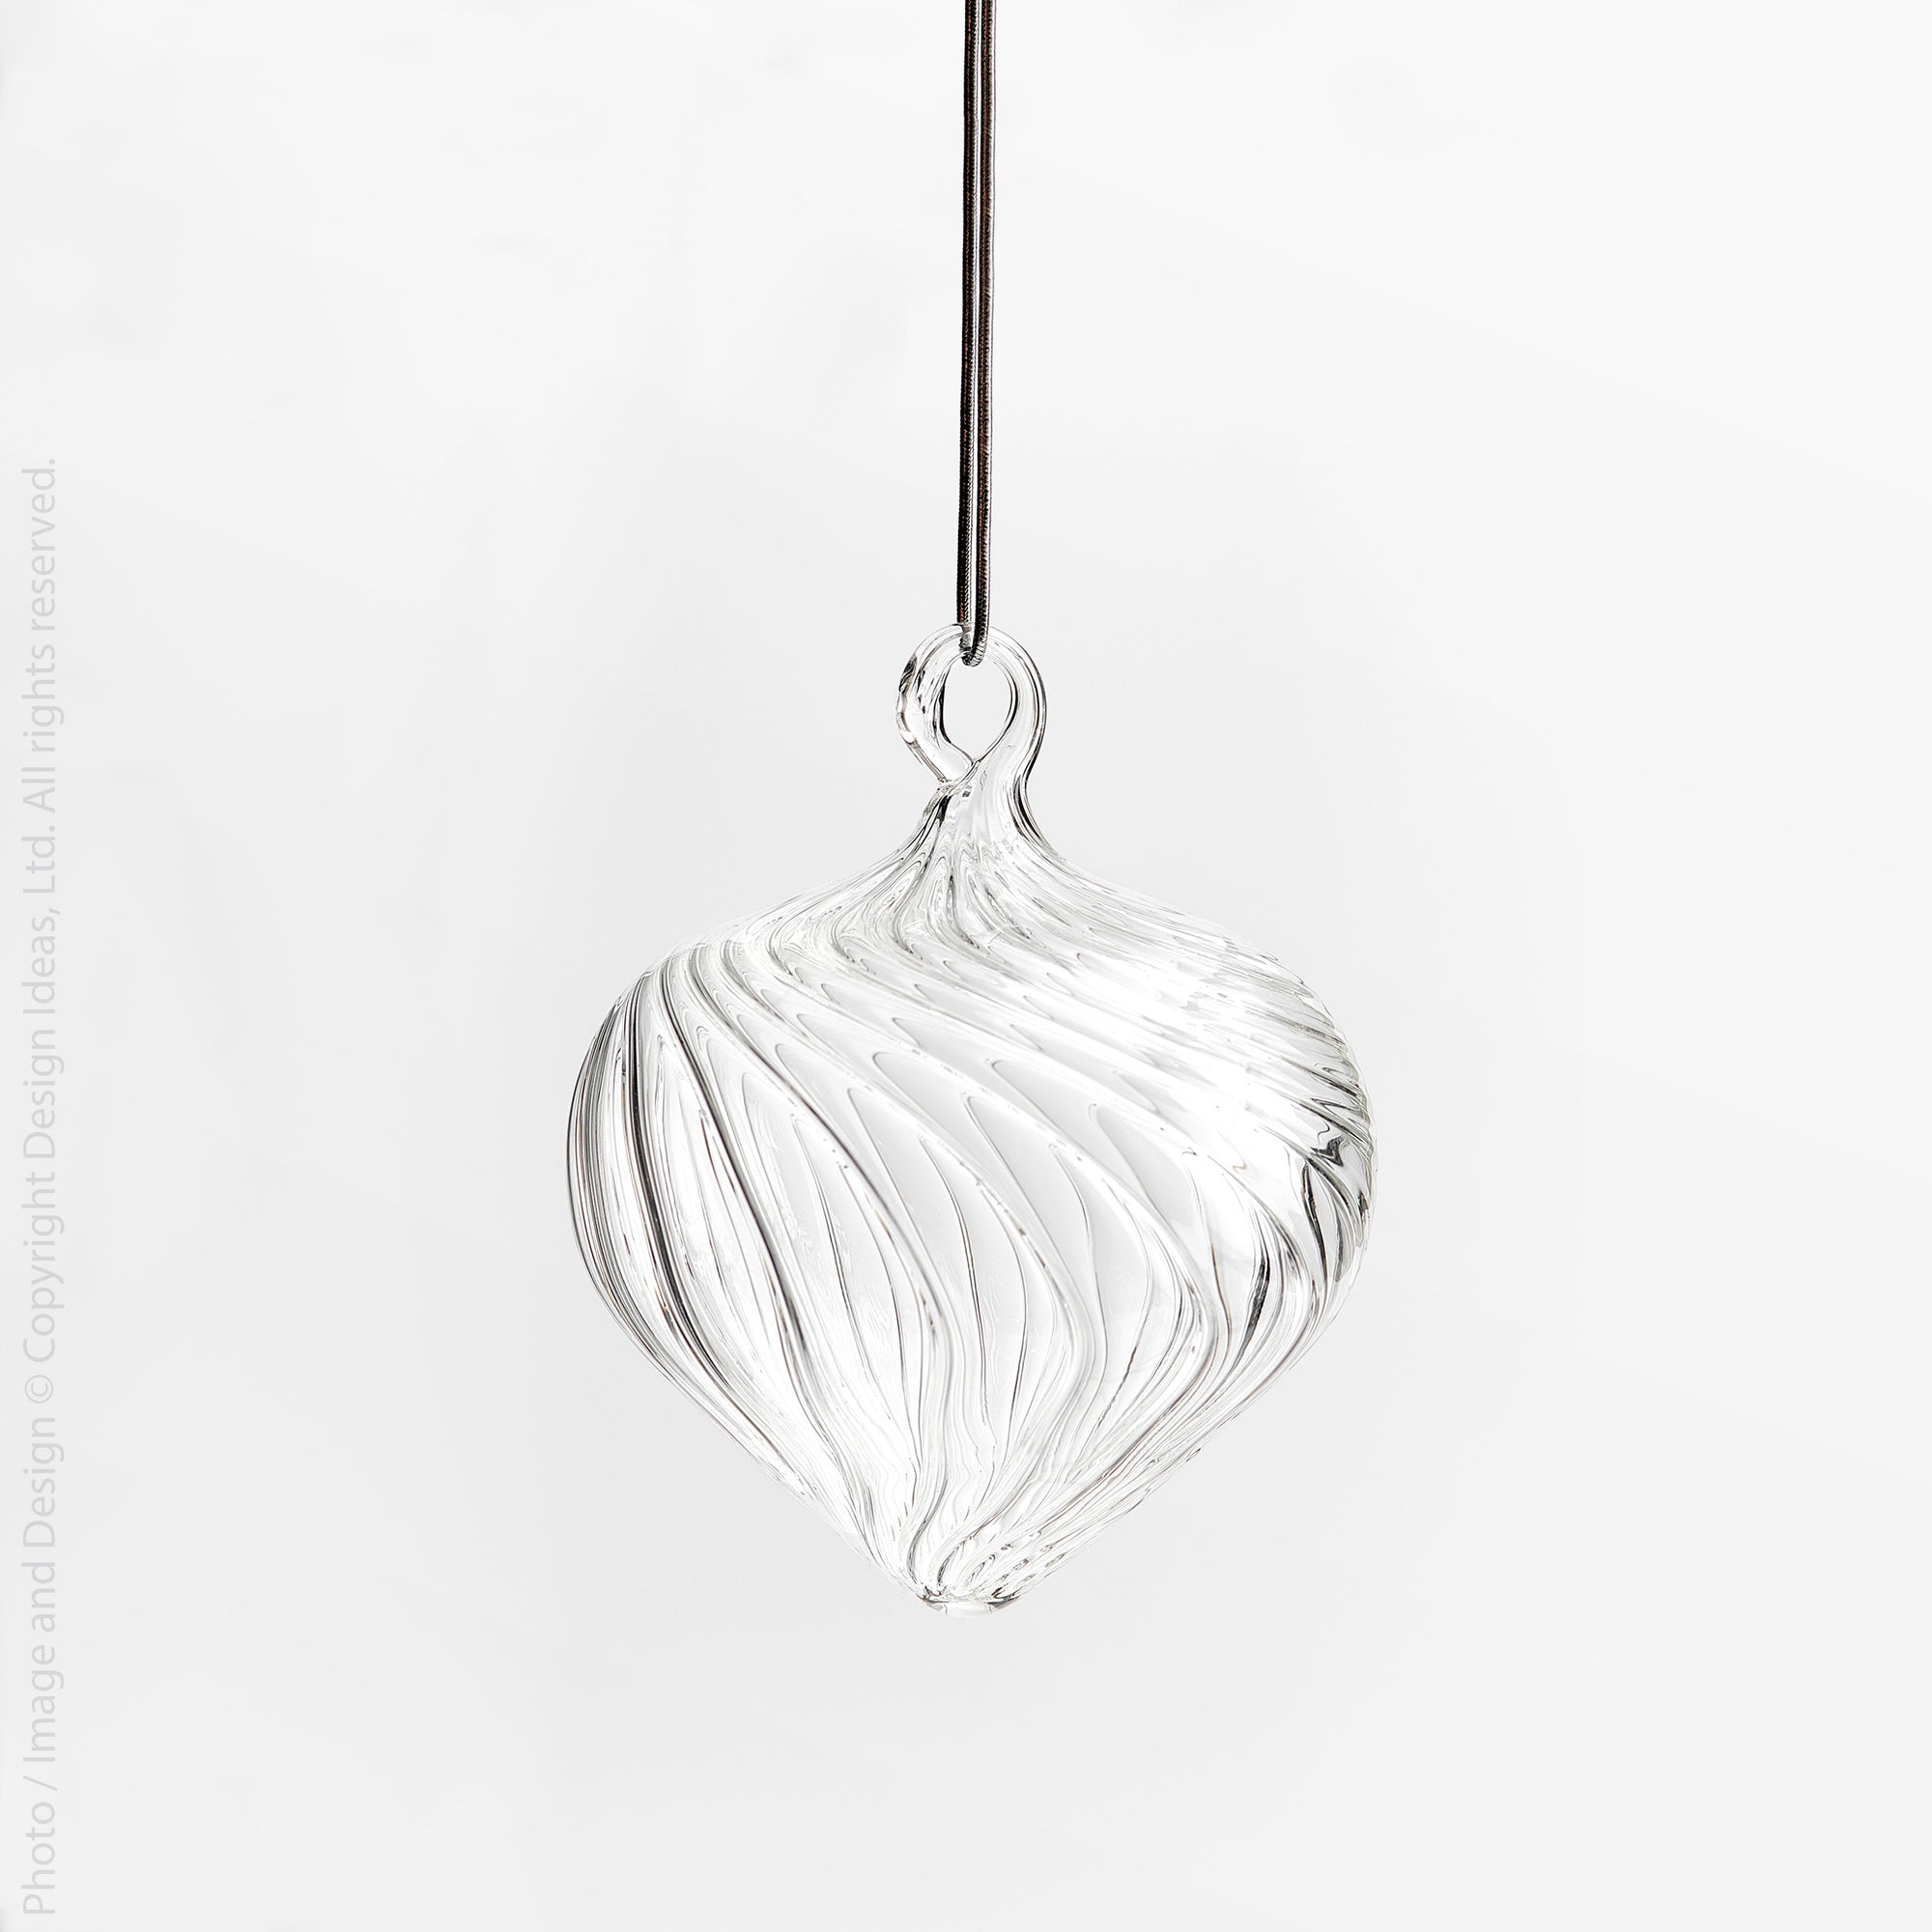 Tullen™ Mouth Blown Glass ornament (3 in)